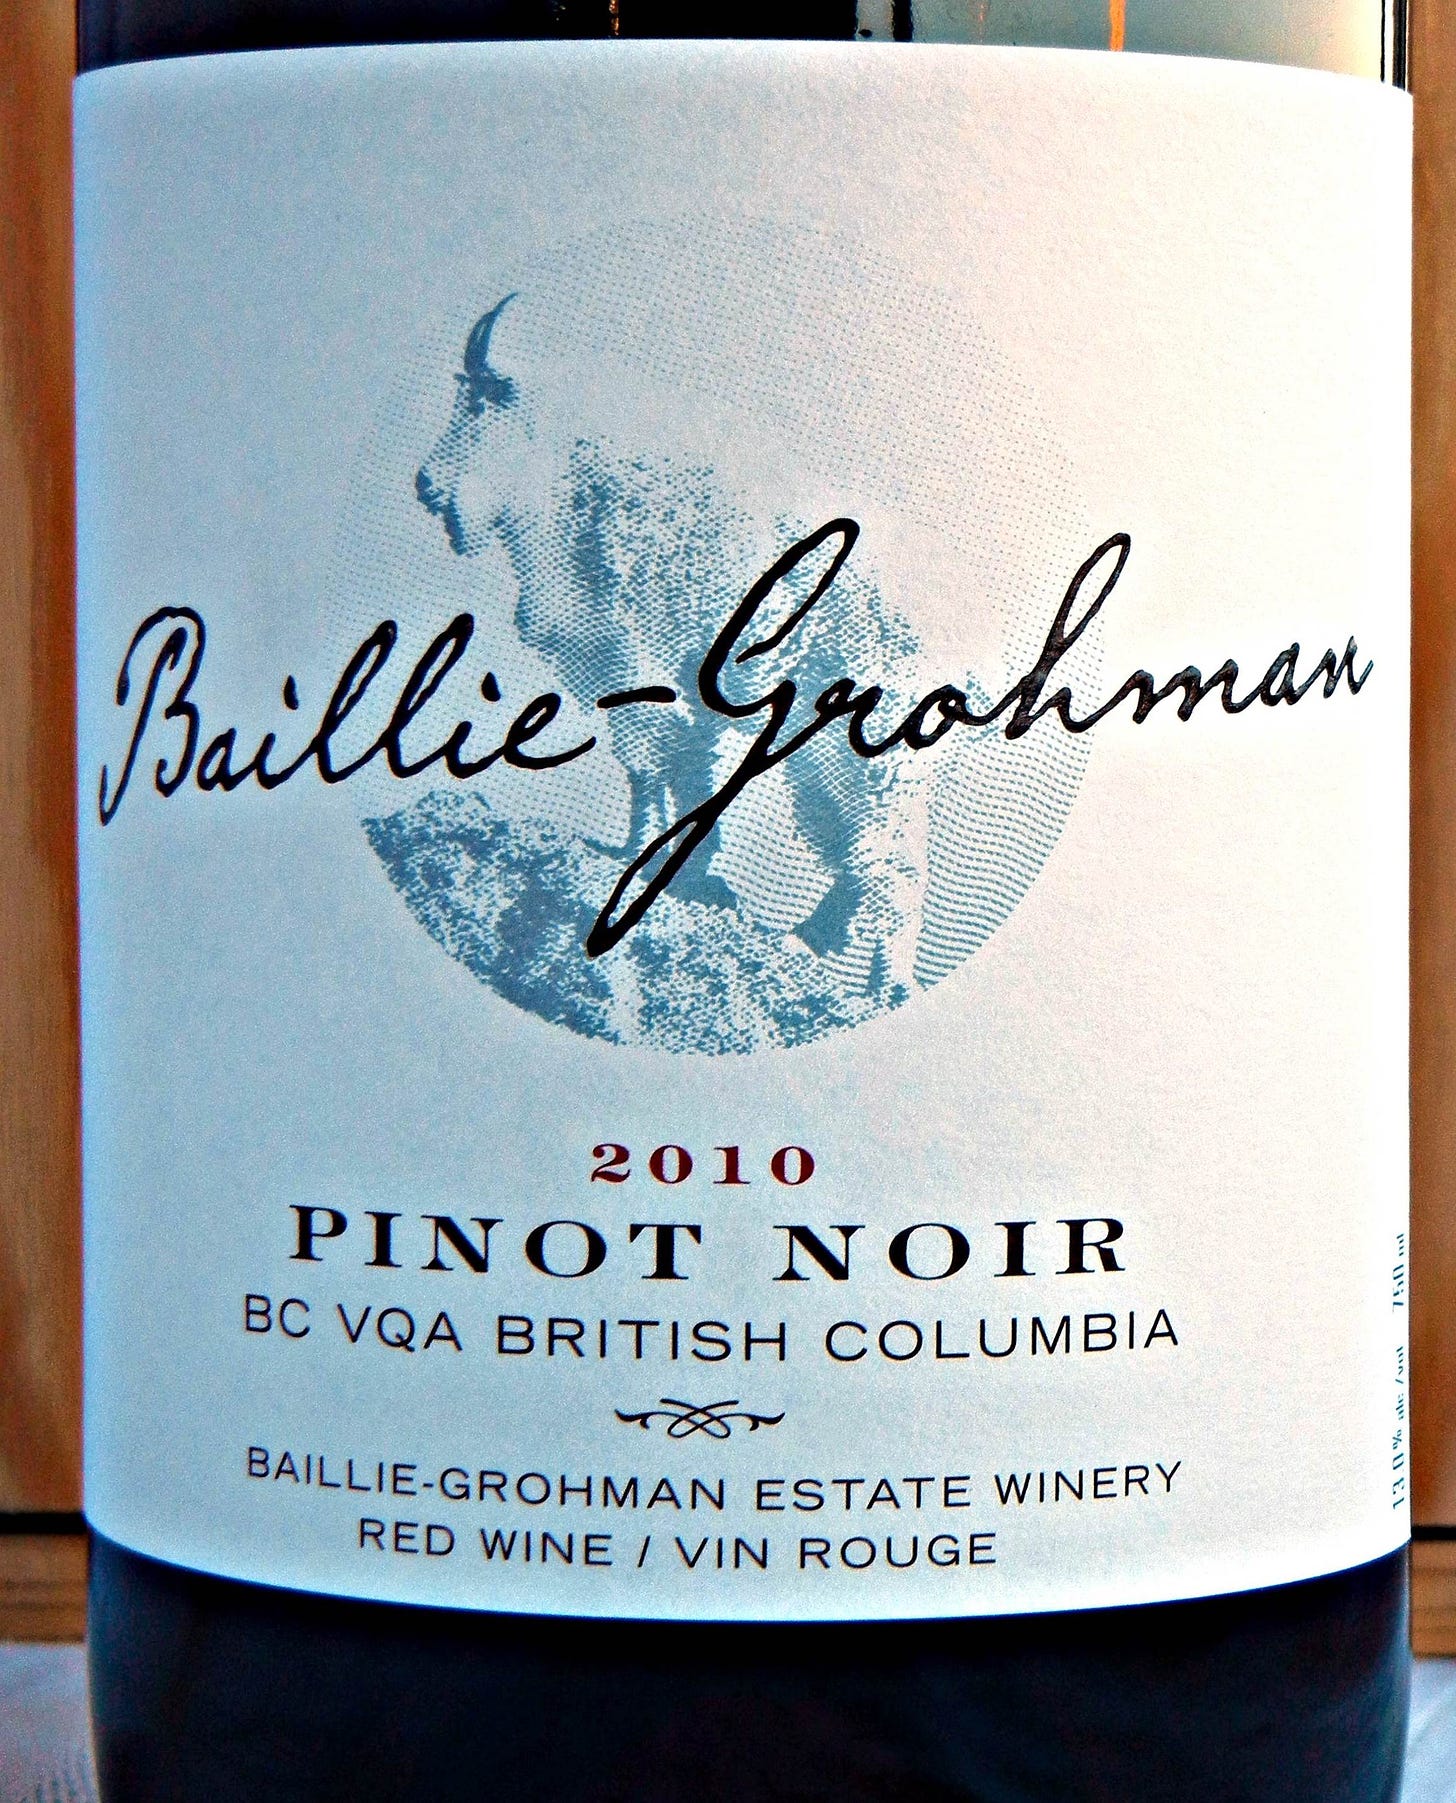 Baillie Grohman Pinot Noir 2010 Label - BC Pinot Noir Tasting Review 10 